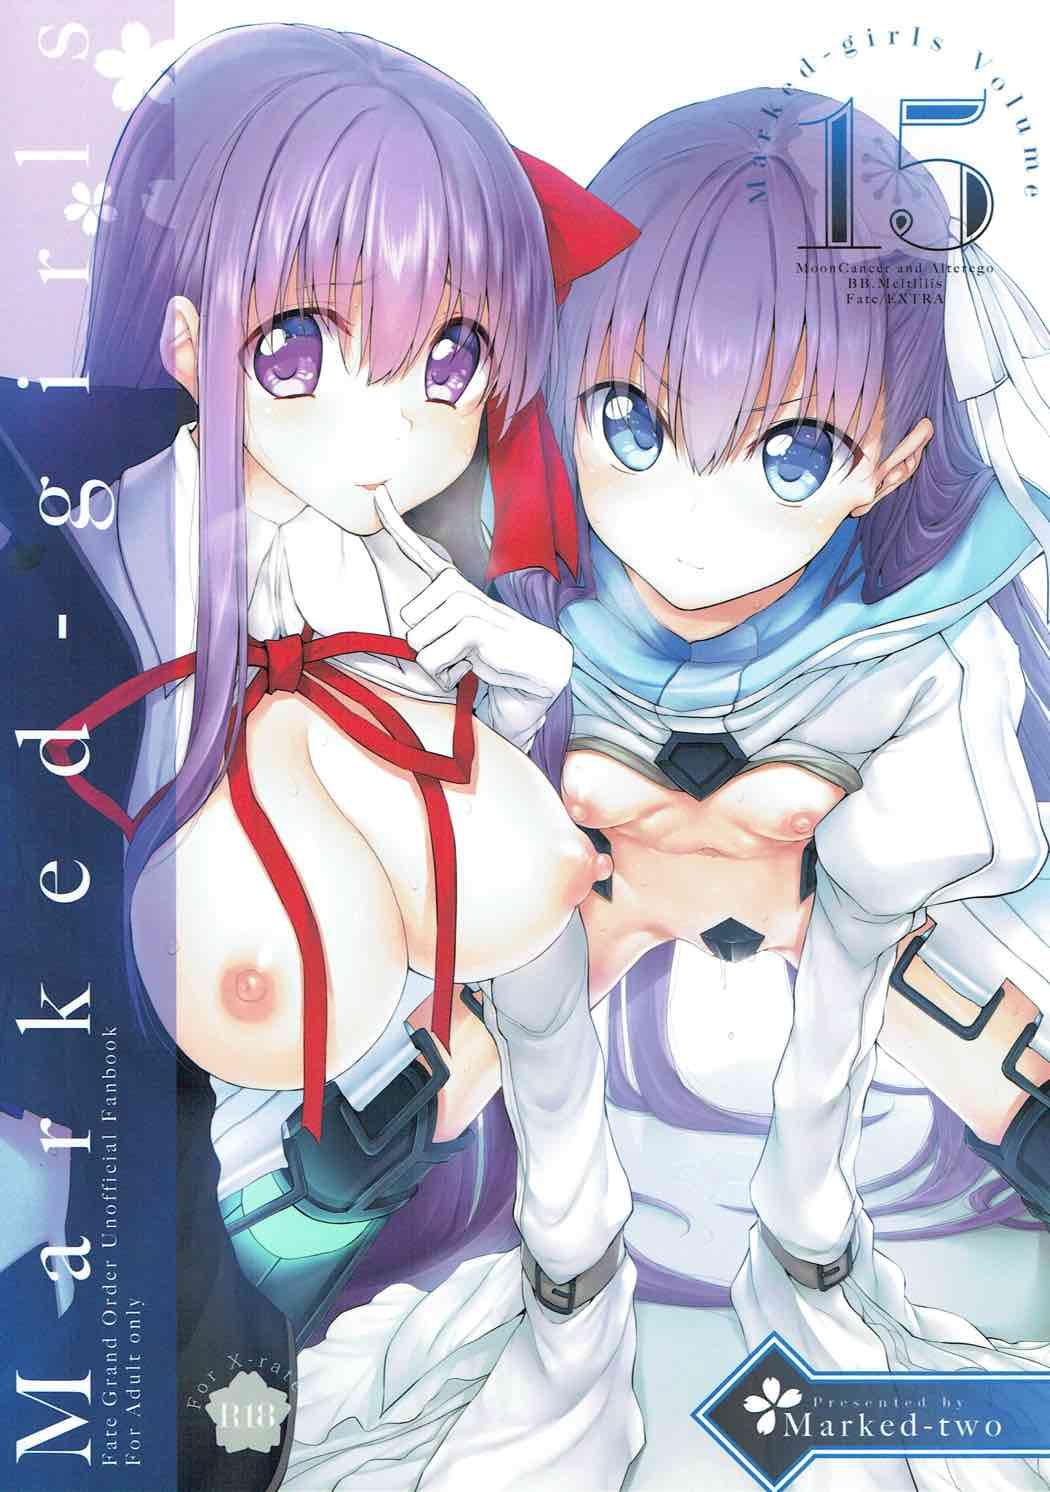 Marked girls vol.15 (C92) [Marked-two (スガヒデオ)] (Fate/Grand Order) 0